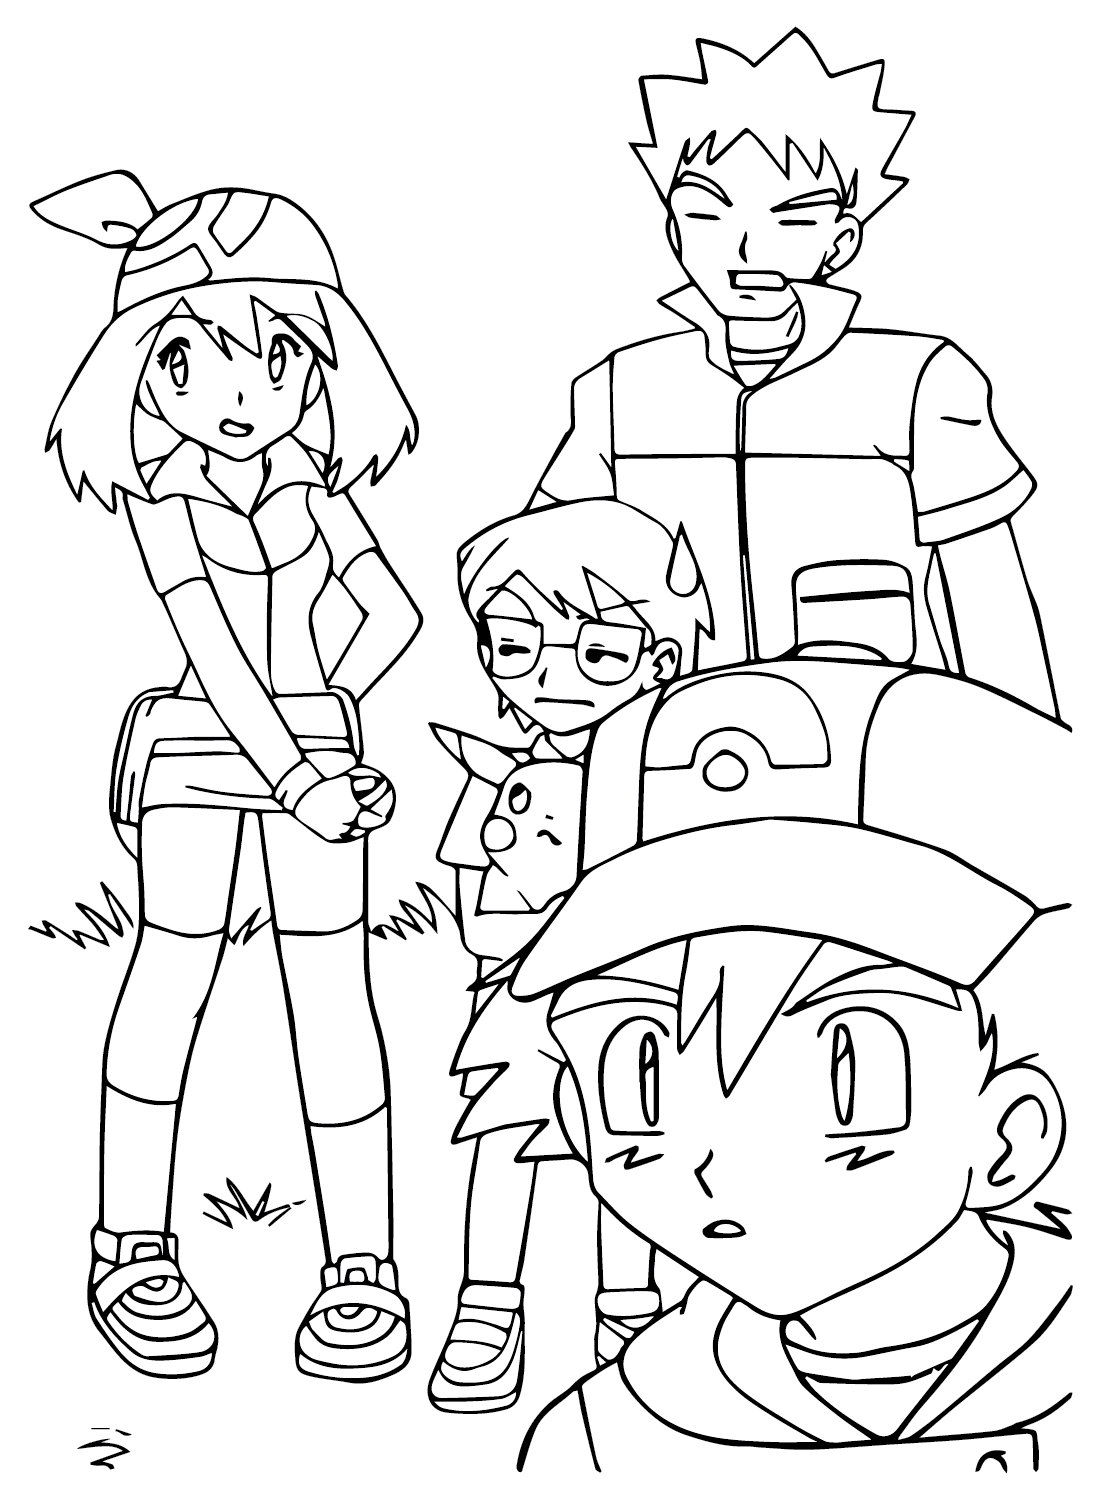 May, Ash, Brock and Max Coloring Page from Brock